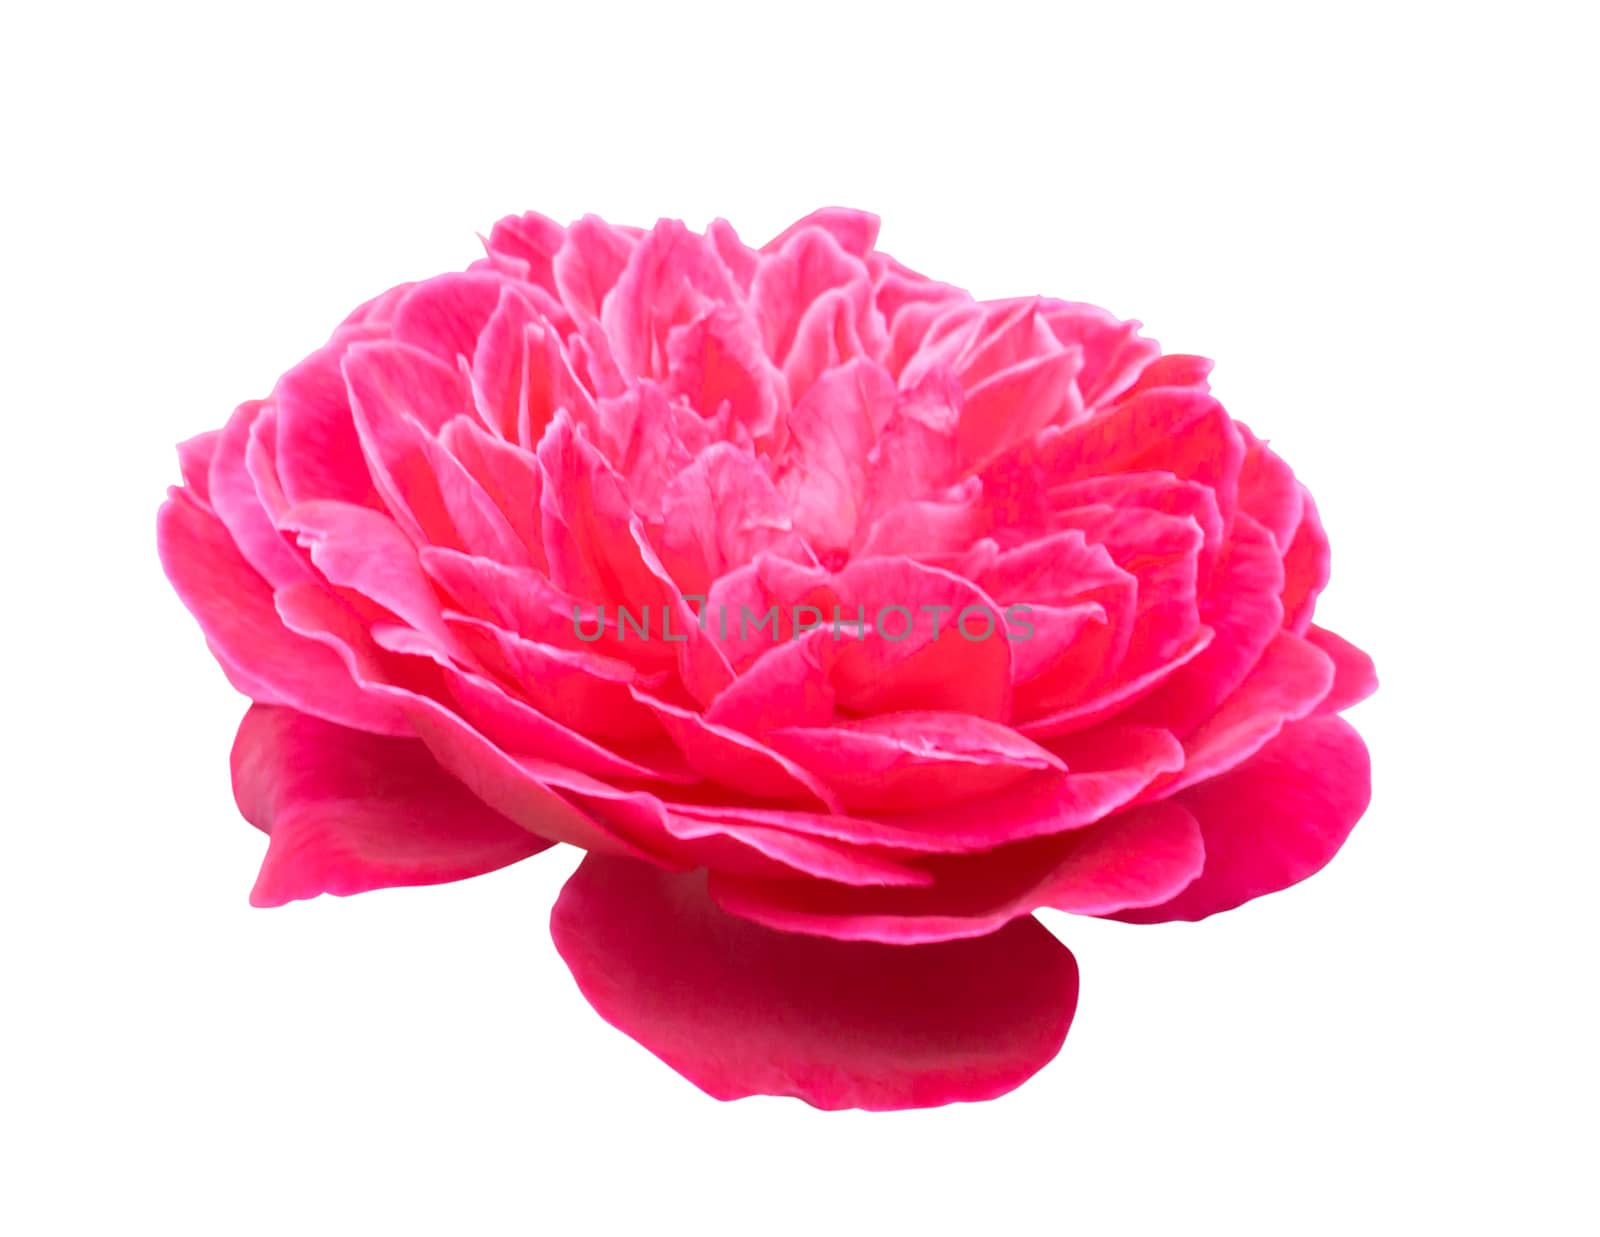 Beautiful sweet pink rose flower isolated on white background, love and romantic concept